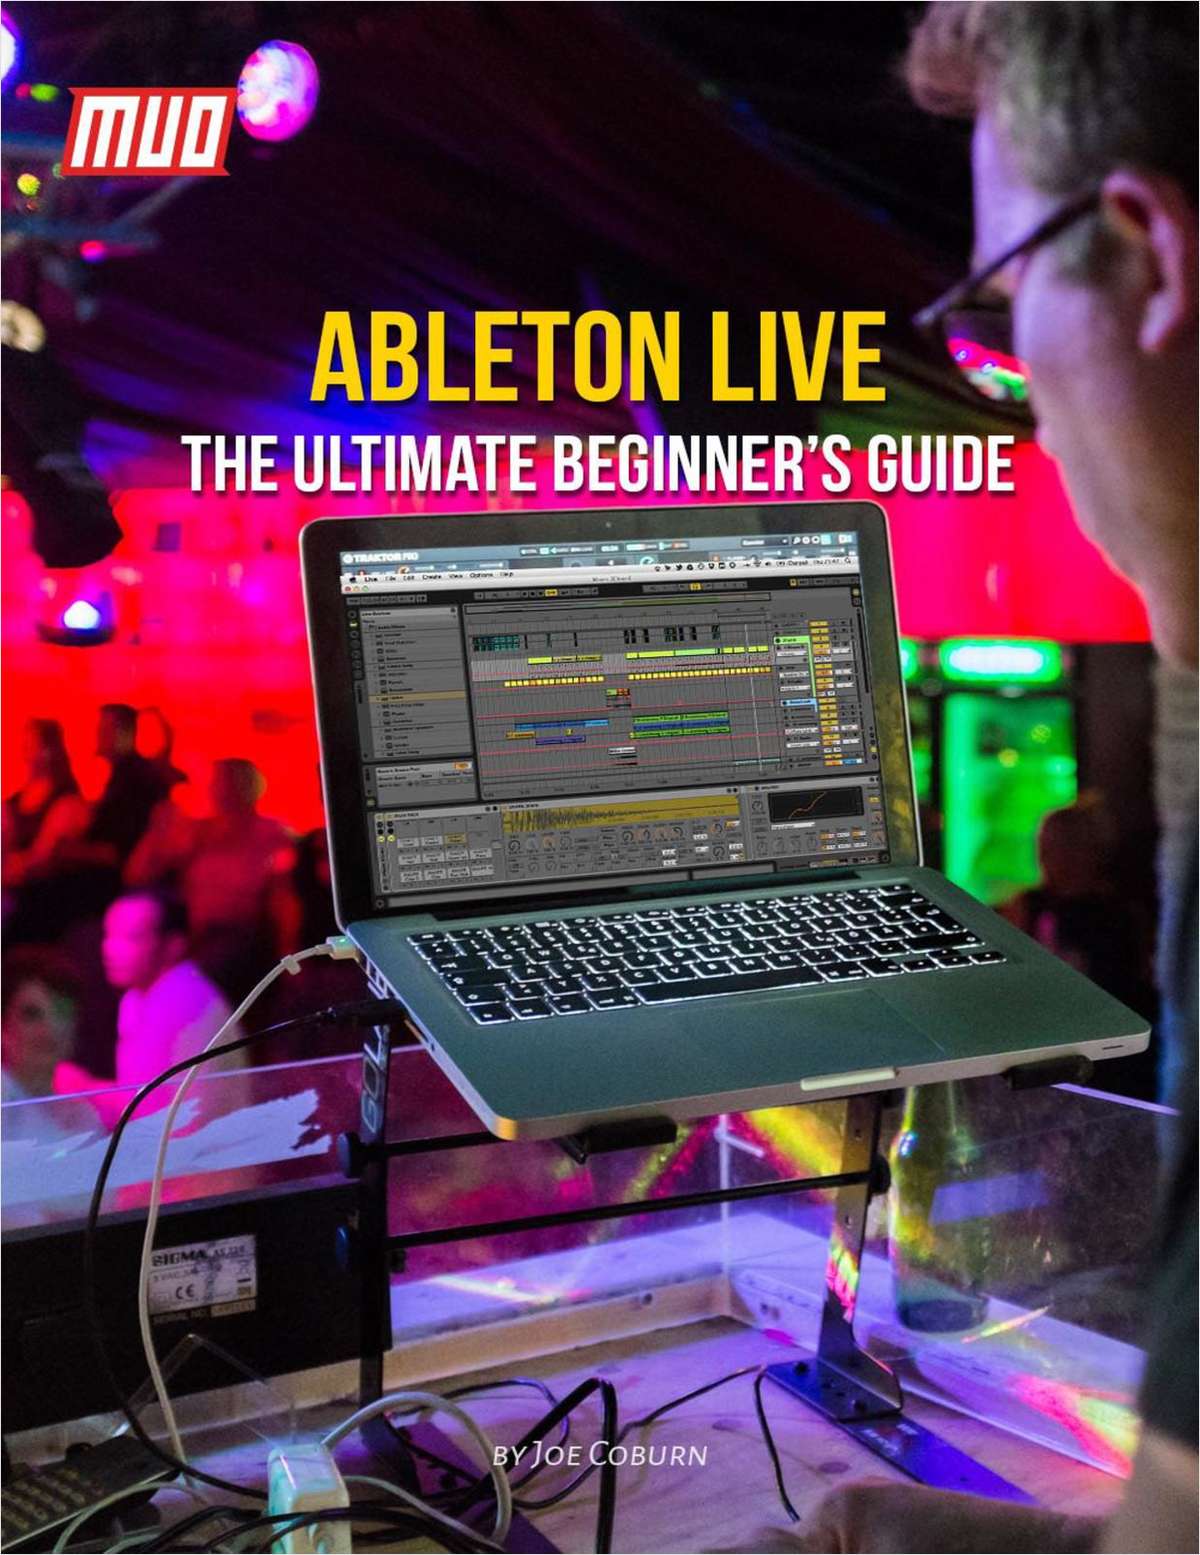 Ableton Live: The Ultimate Beginner's Guide Free Guide